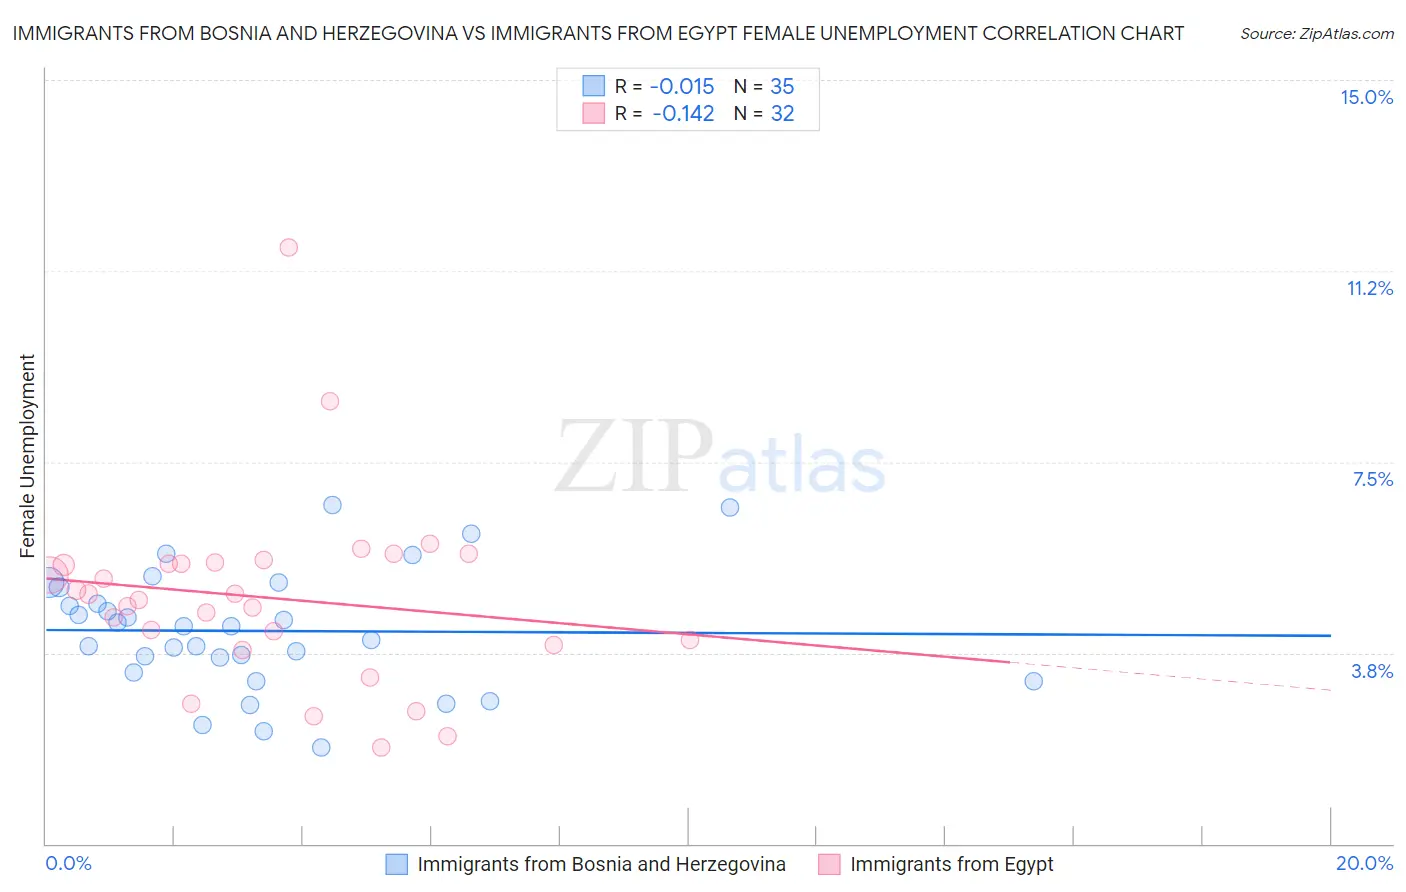 Immigrants from Bosnia and Herzegovina vs Immigrants from Egypt Female Unemployment